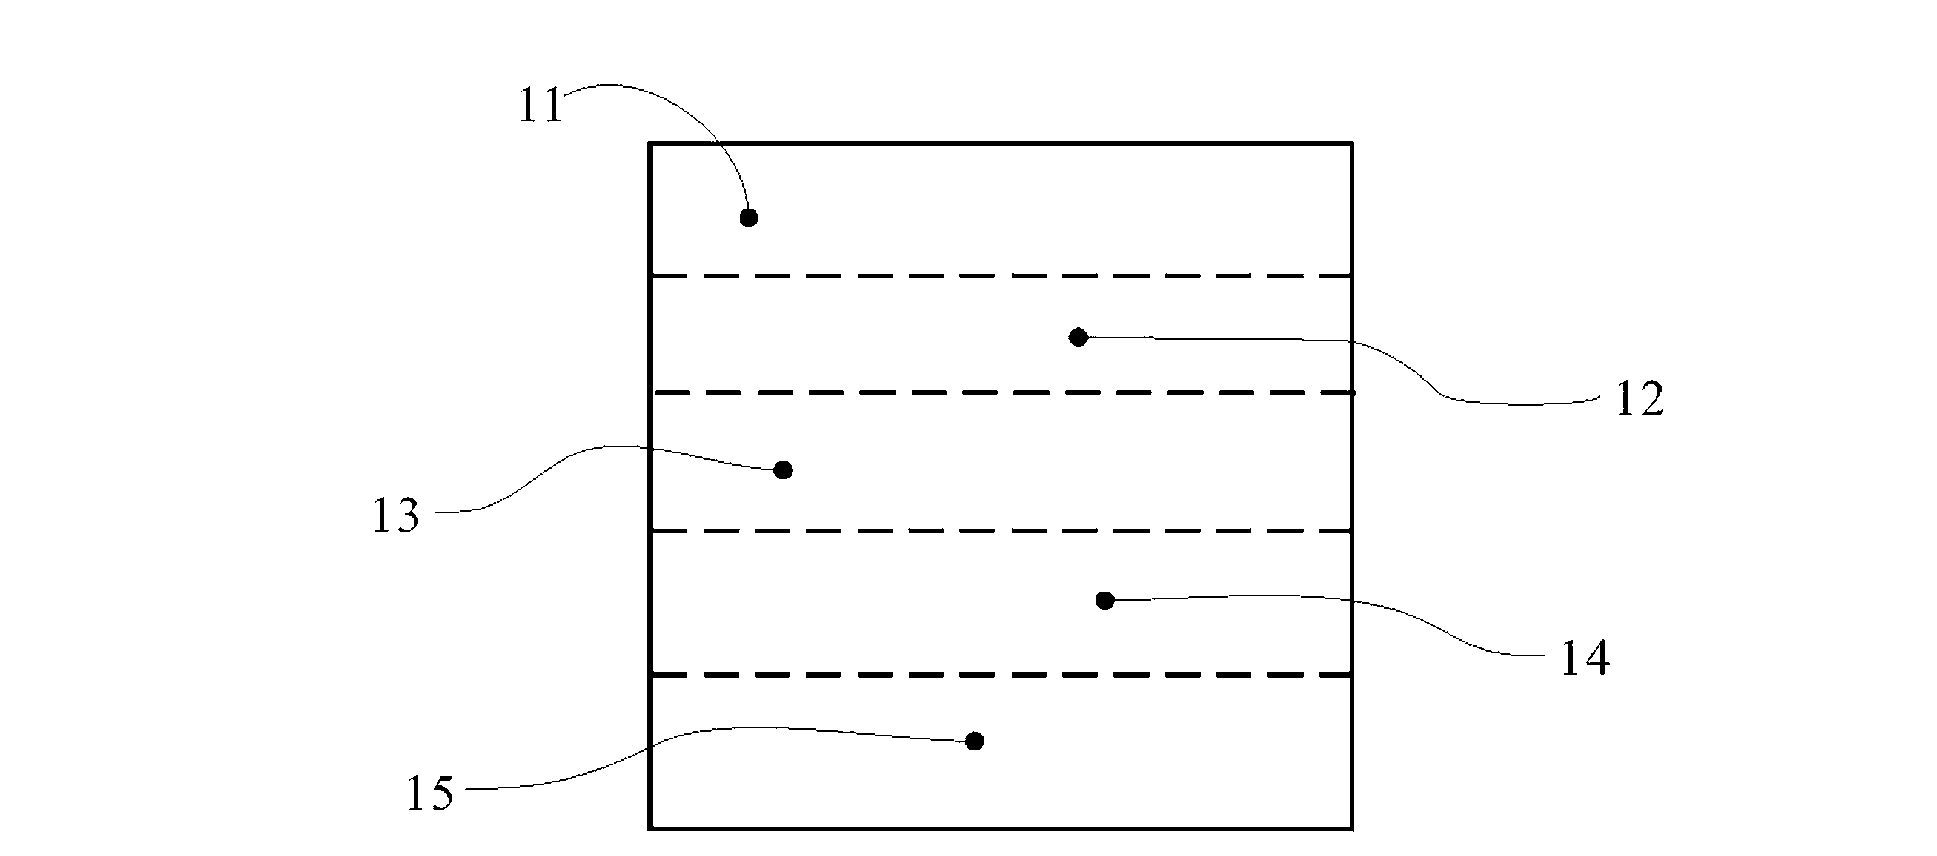 Method for preventing touch detection and LCD (liquid crystal display) scan from mutual interference